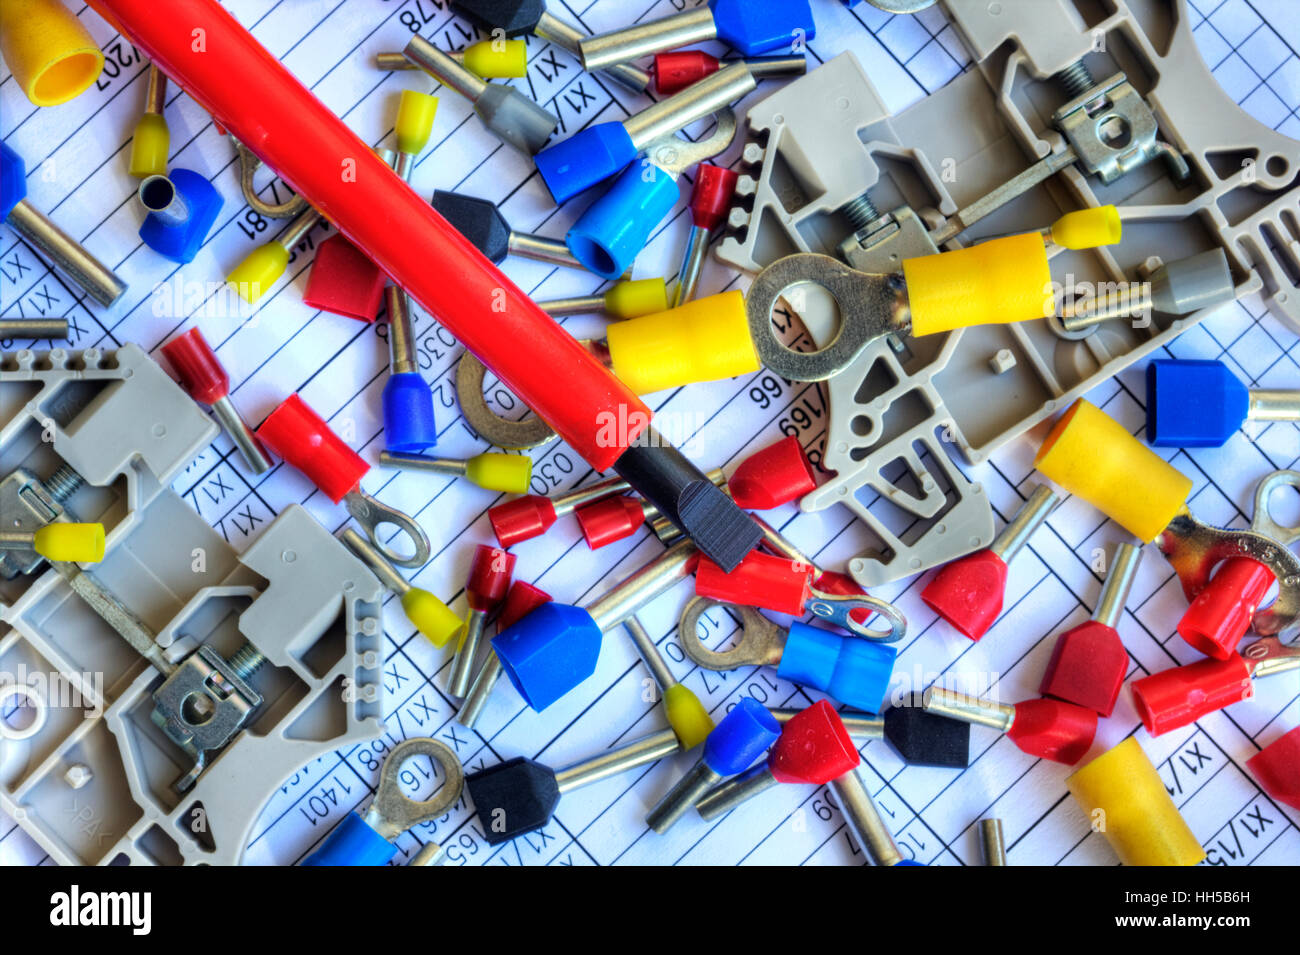 Electrical components closeup Stock Photo